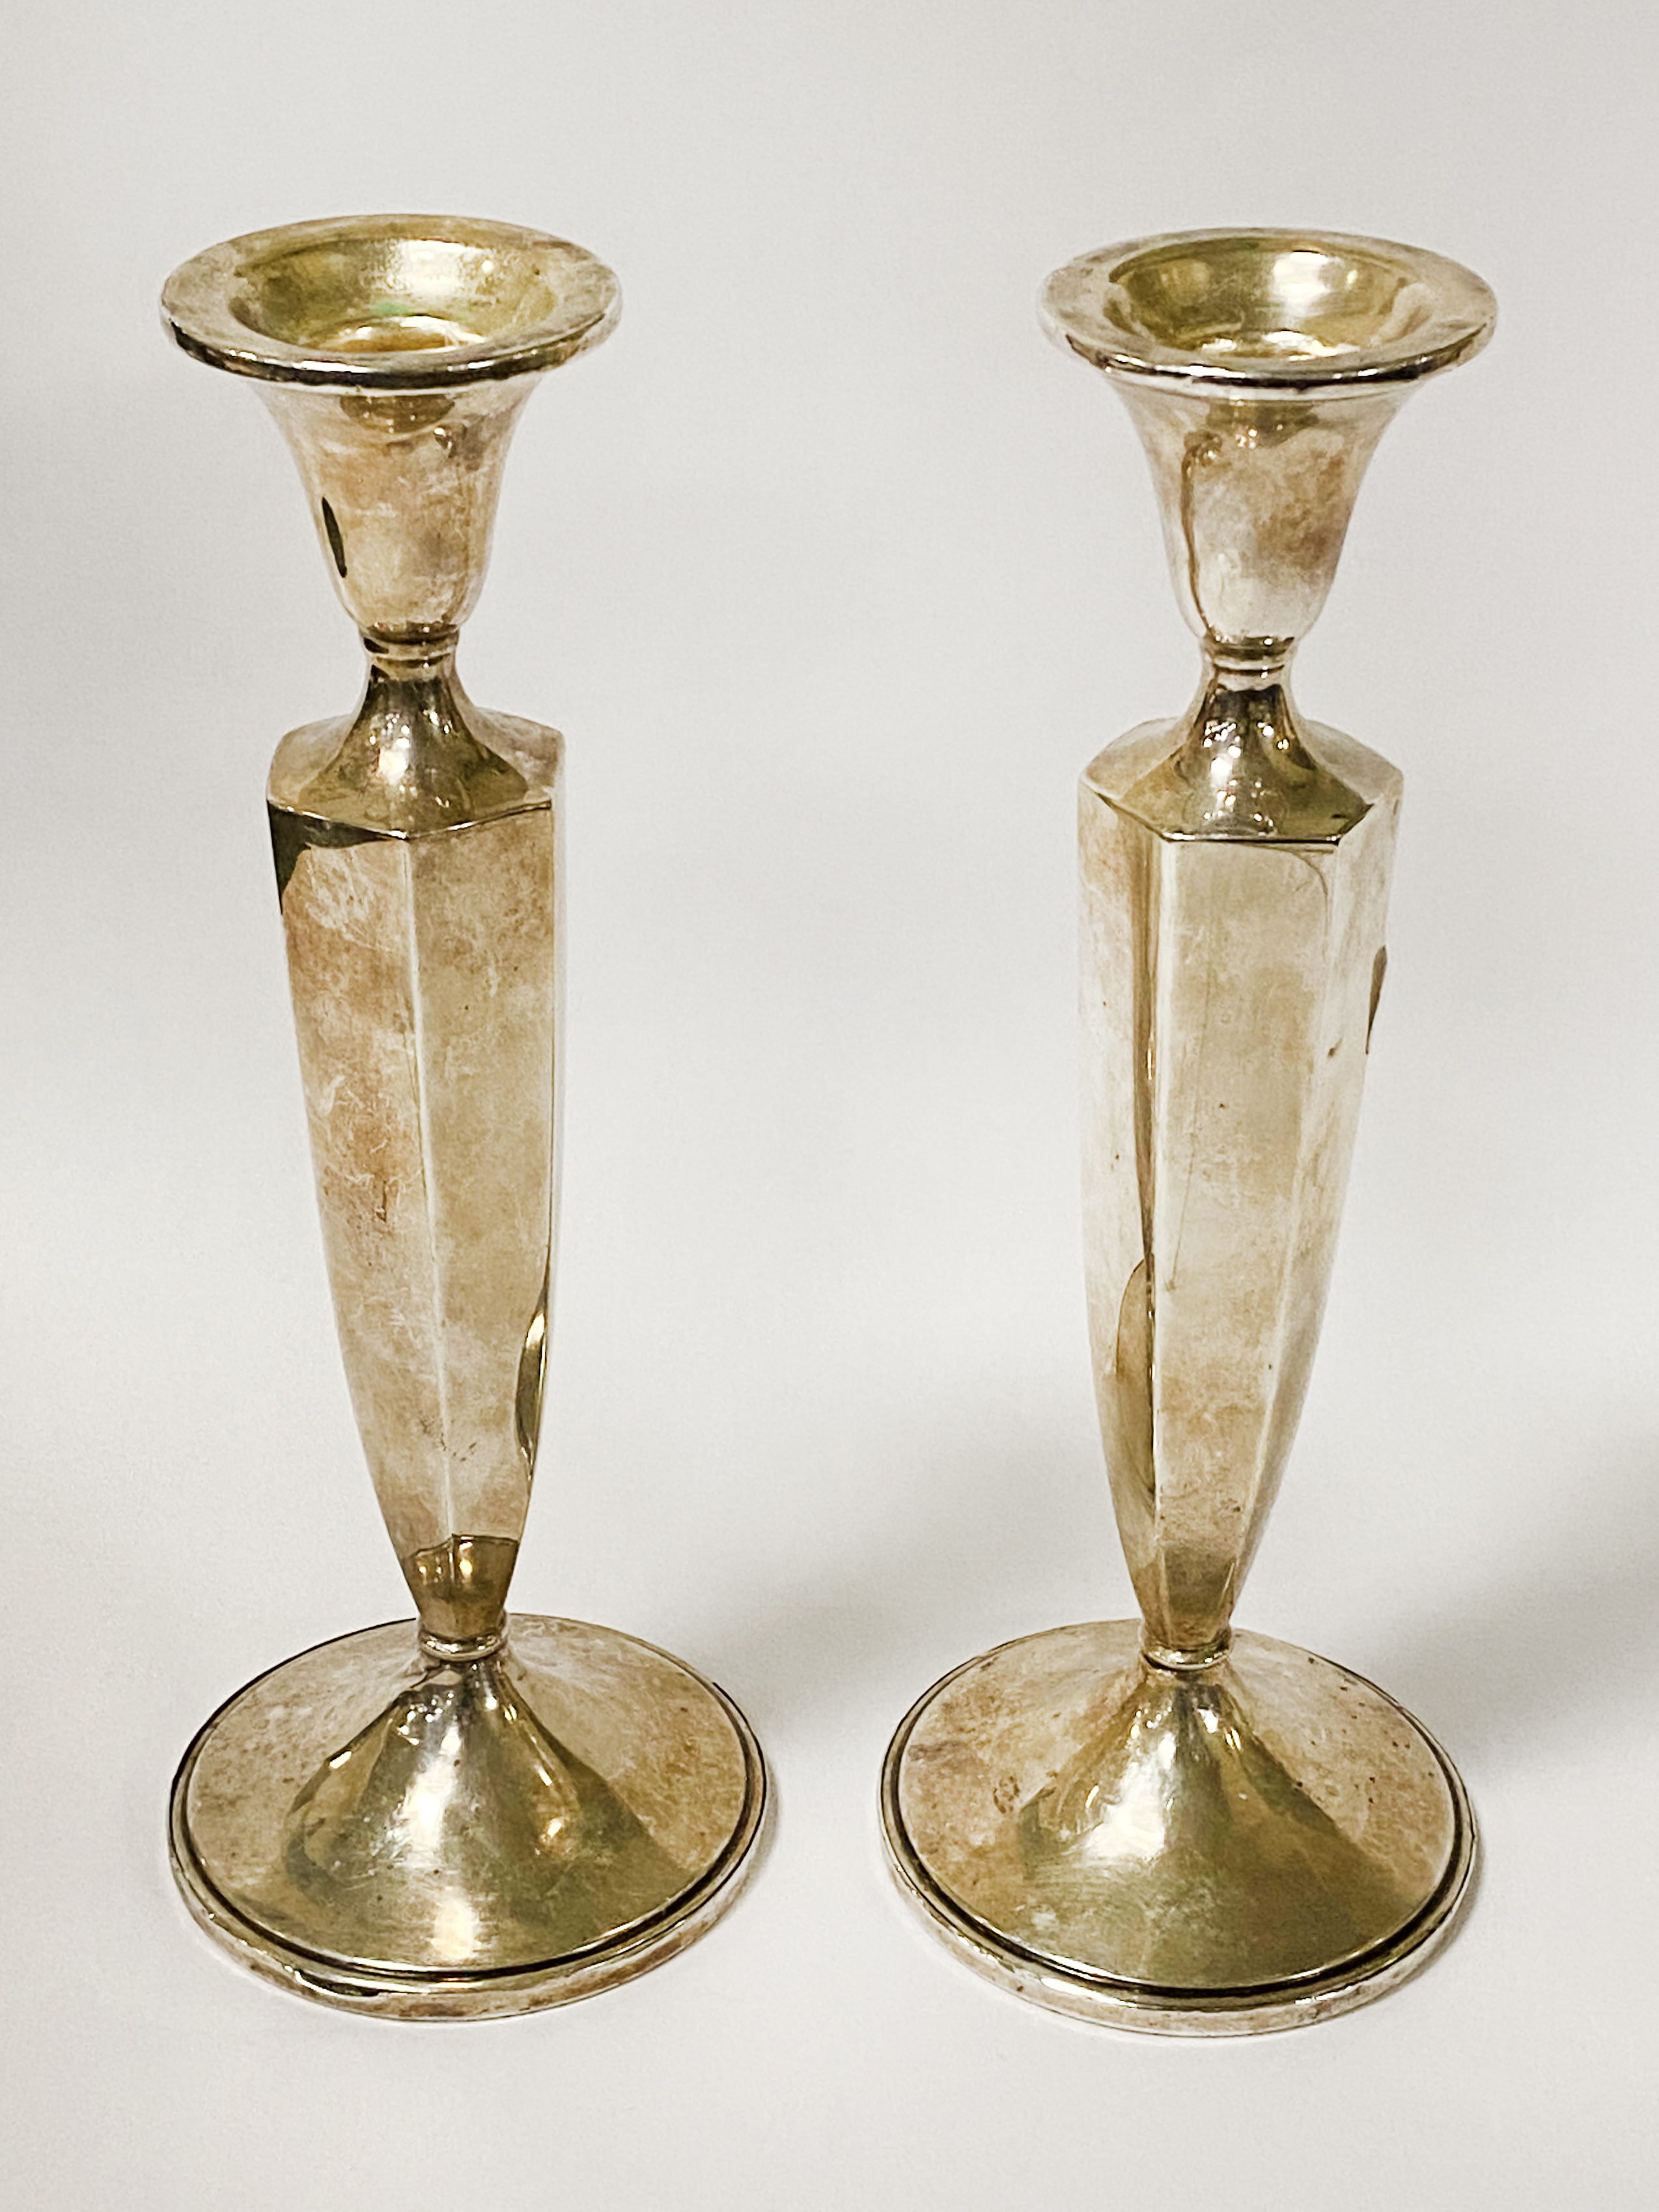 PAIR OF TALL STERLING SILVER CANDLESTICKS - APPROX 25 CMS (H)